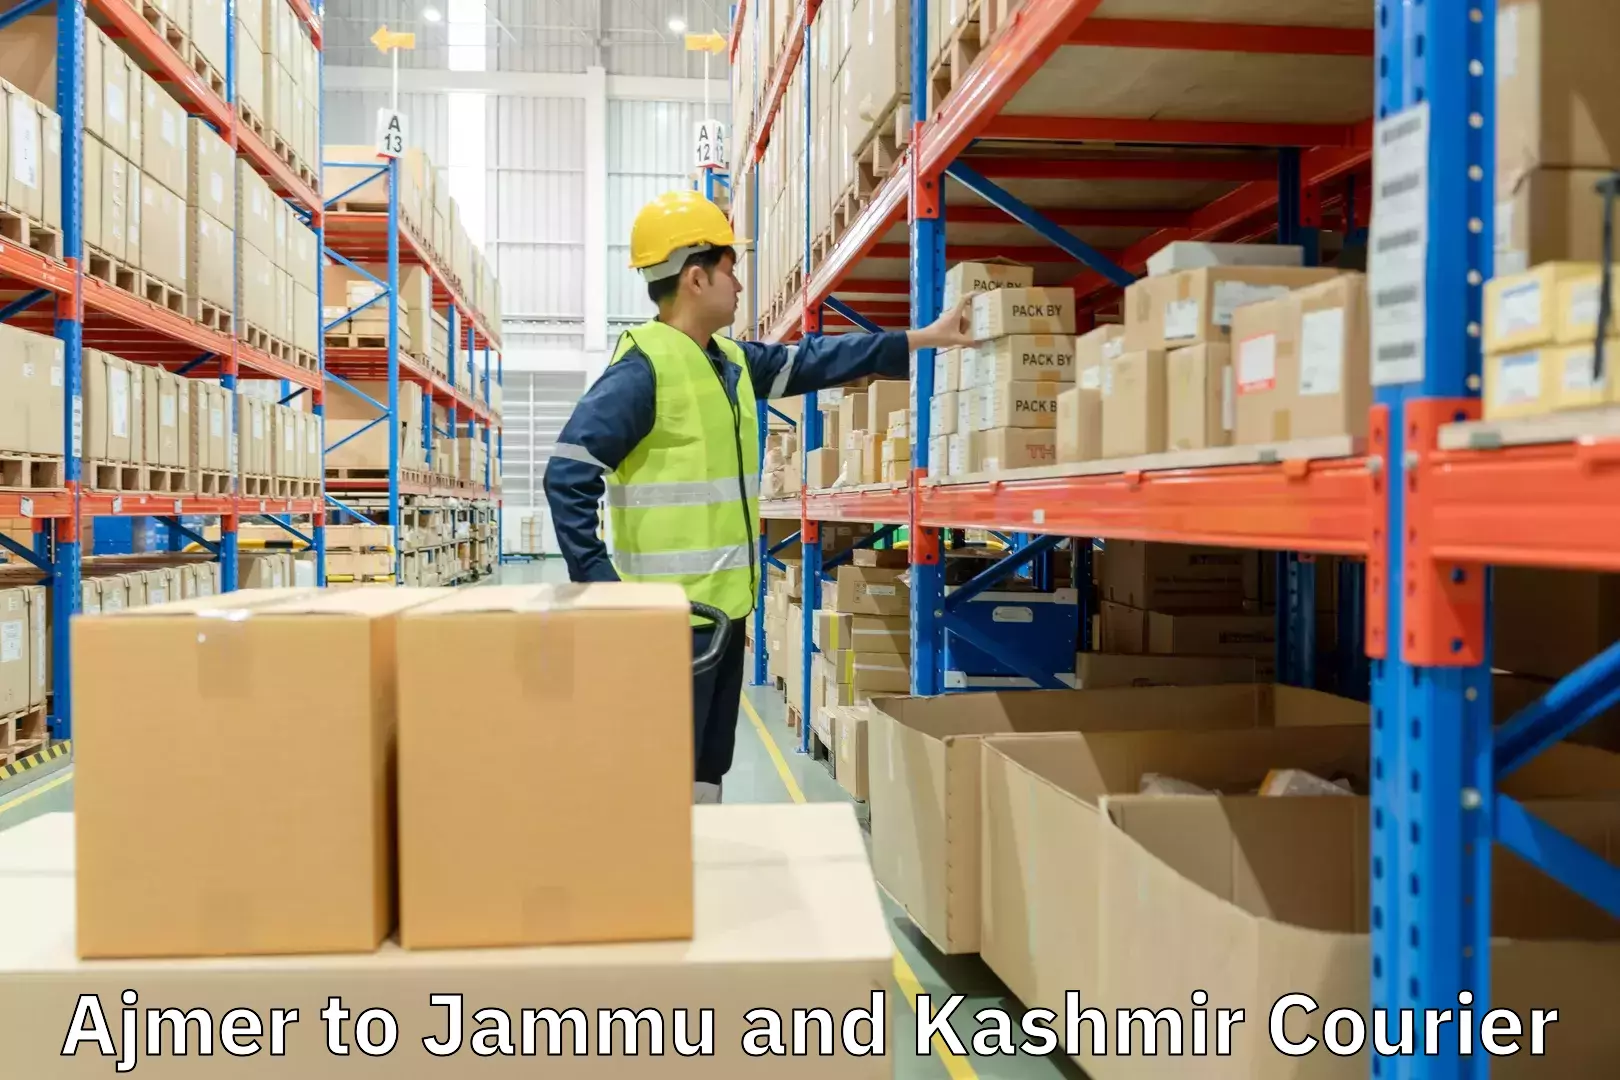 Sustainable delivery practices Ajmer to Jammu and Kashmir